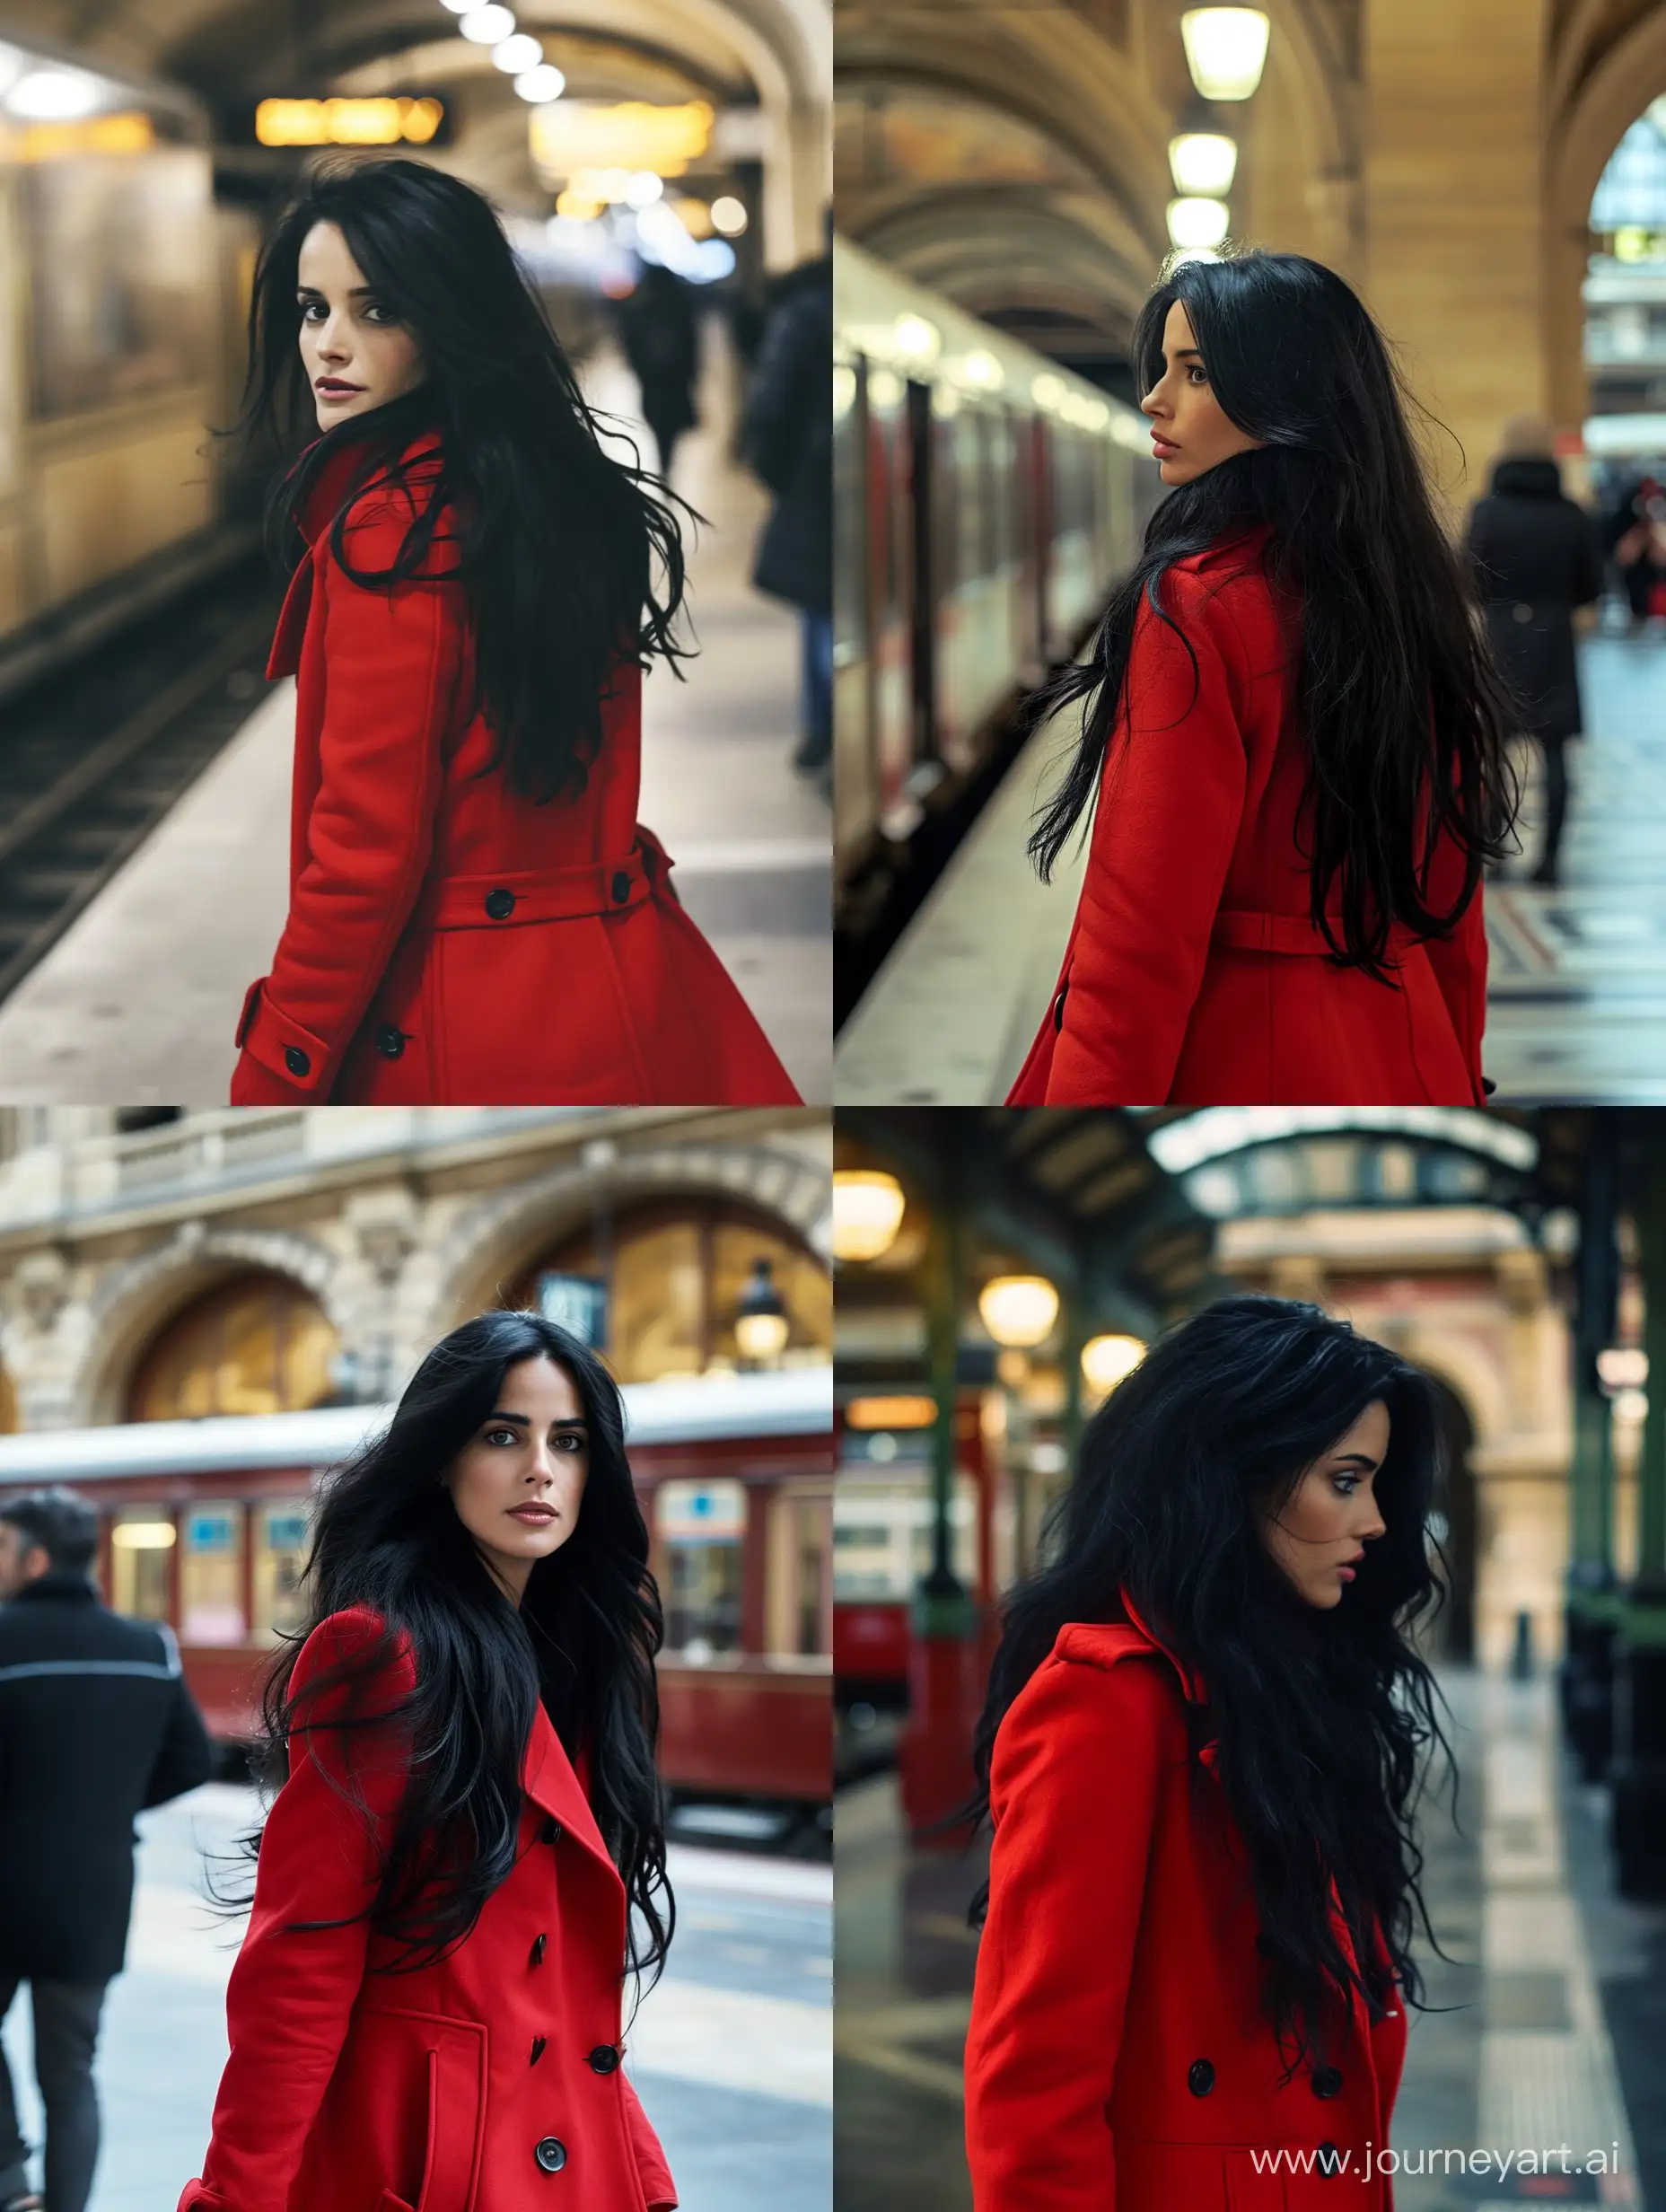 a woman with long black hair, wearing a red coat, walks through a train station in Paris, actress Penelope Cruz